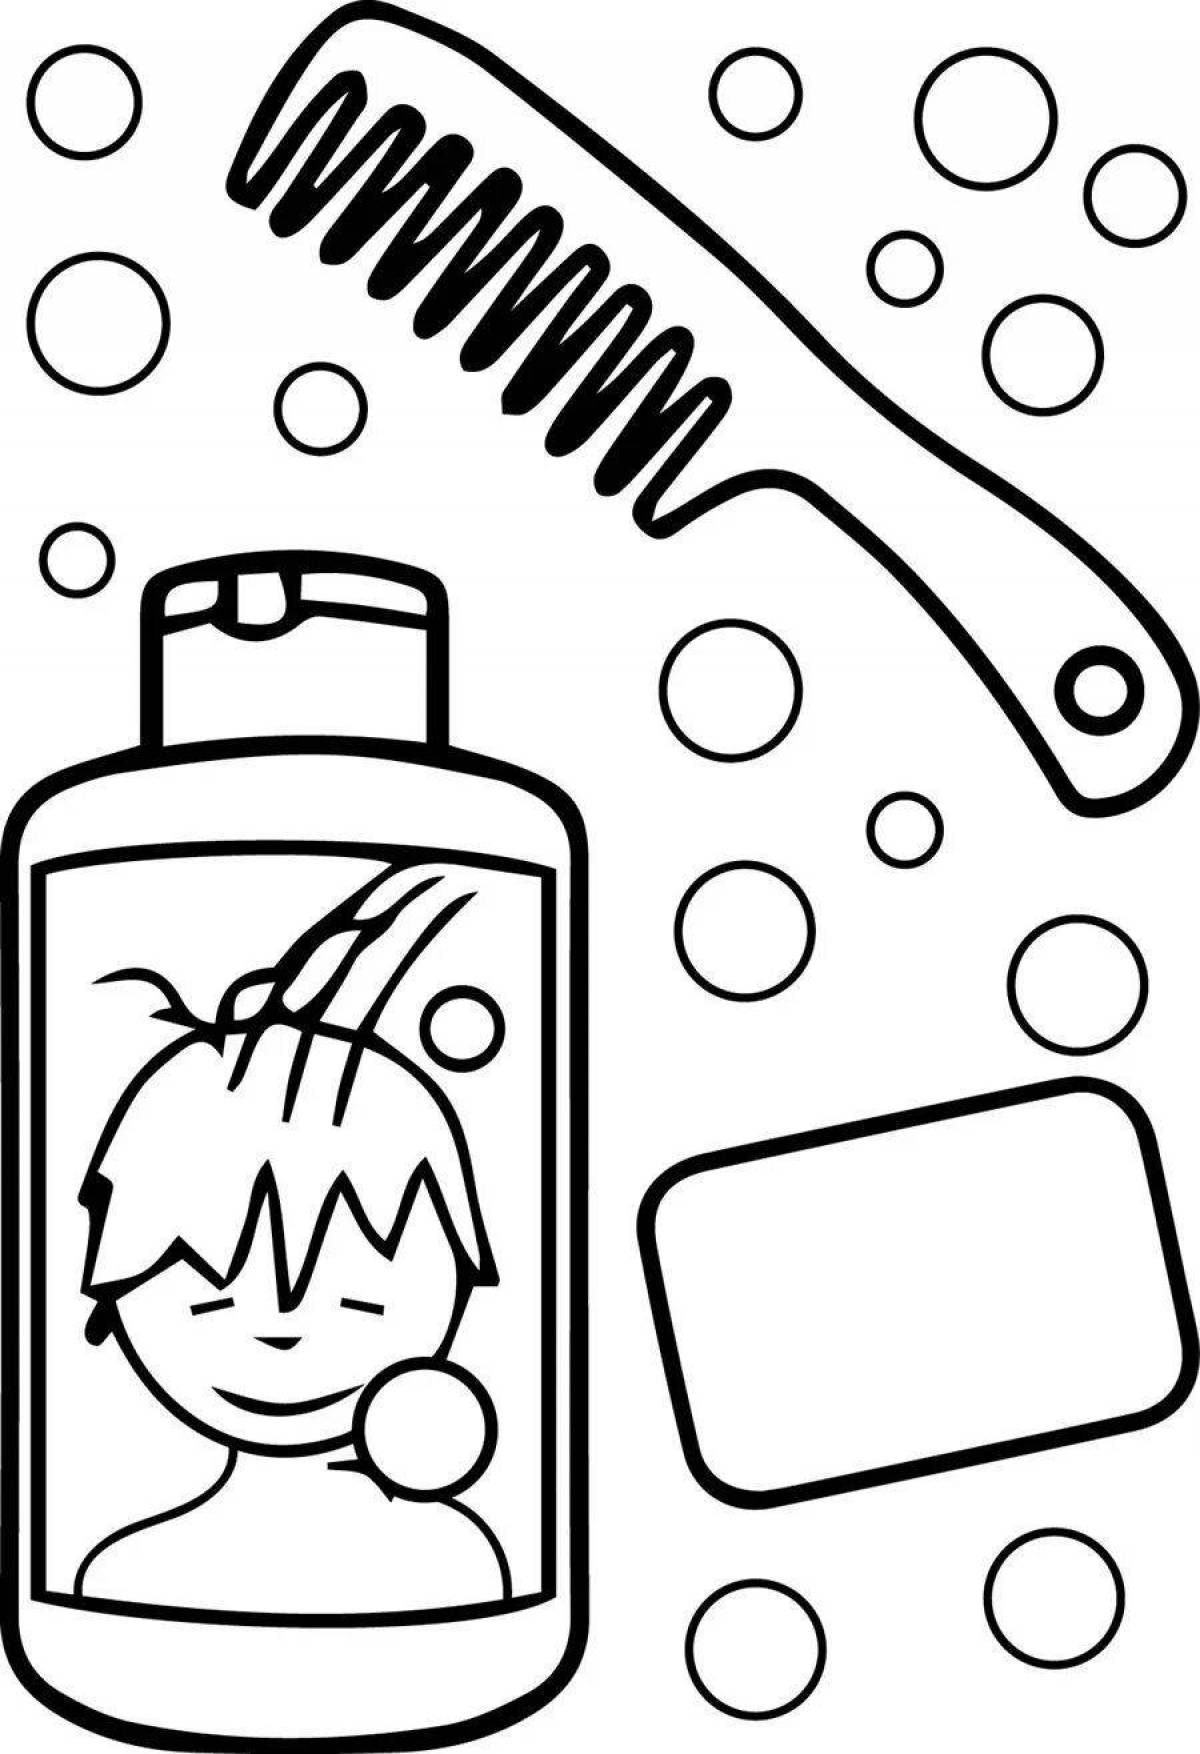 Coloring bright hygiene products